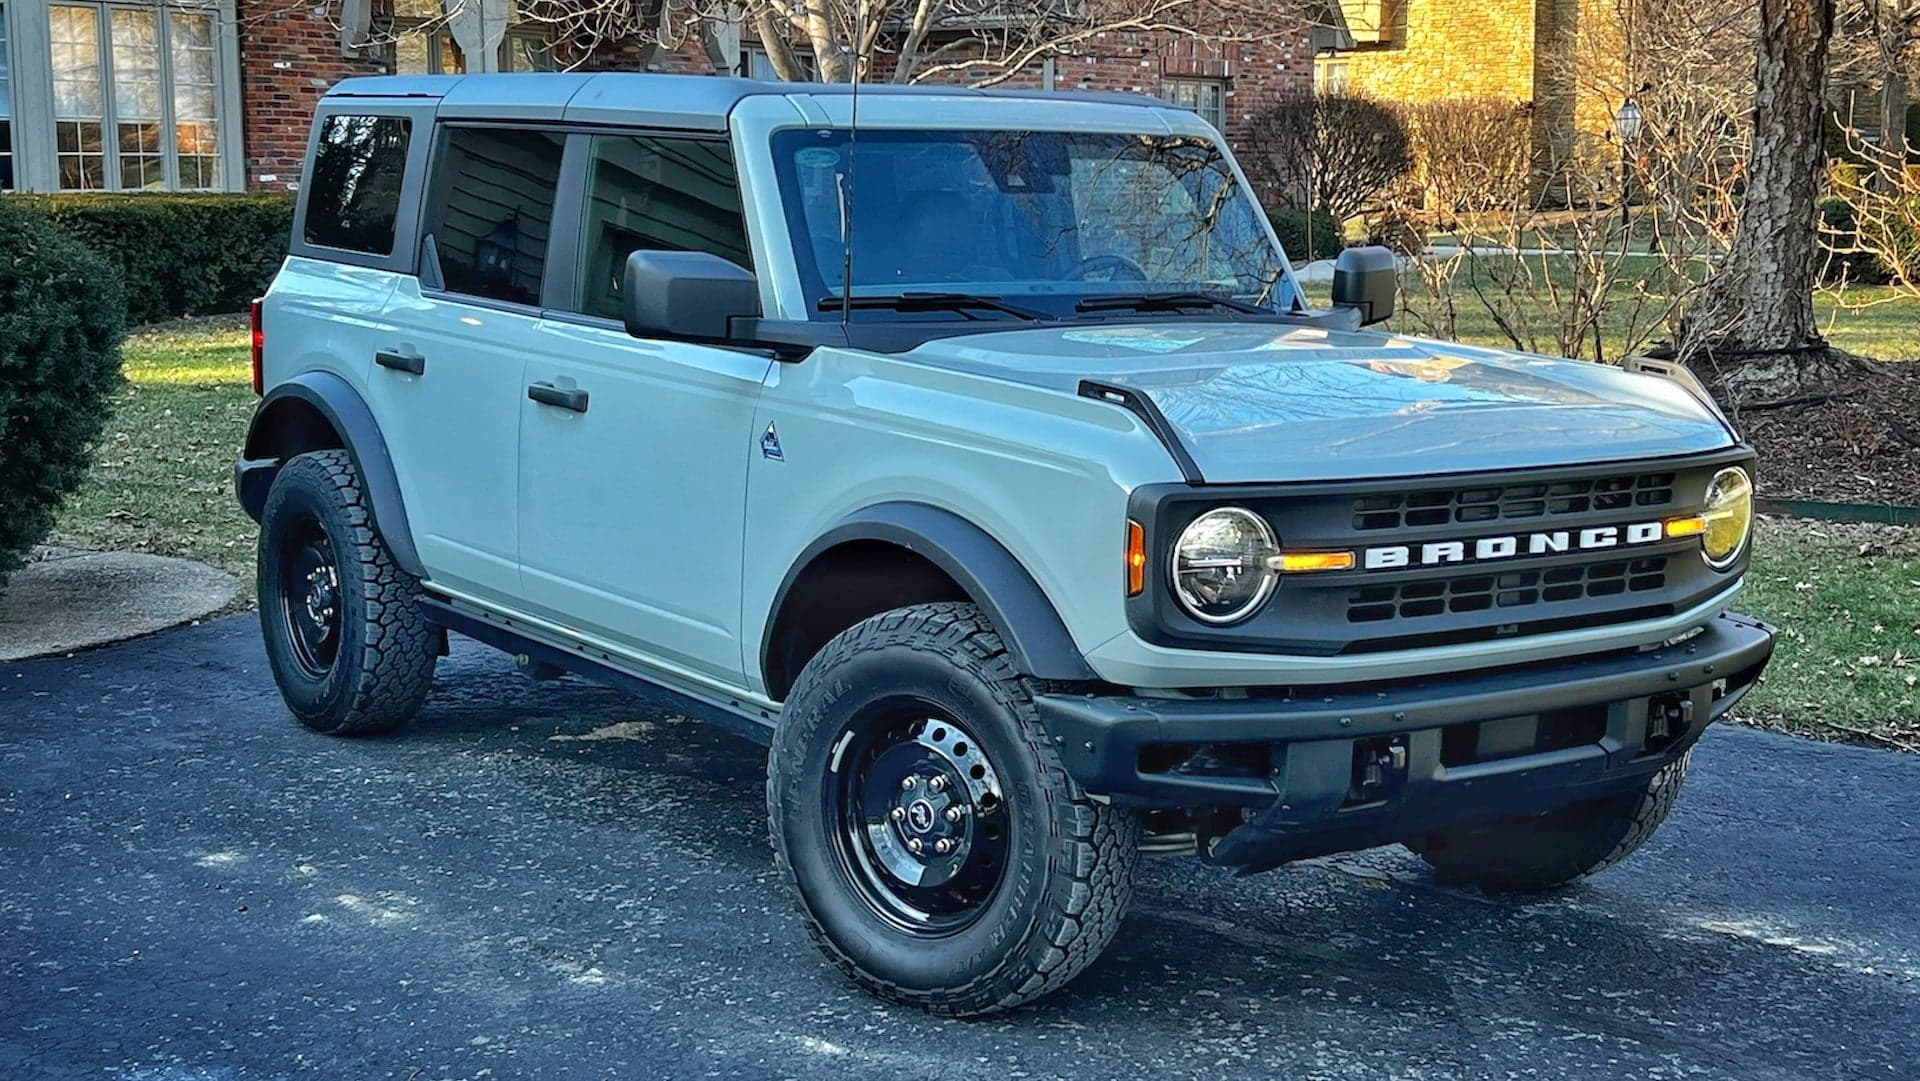 2021 Ford Bronco Review: A Rugged SUV That’s Down for Family Duty